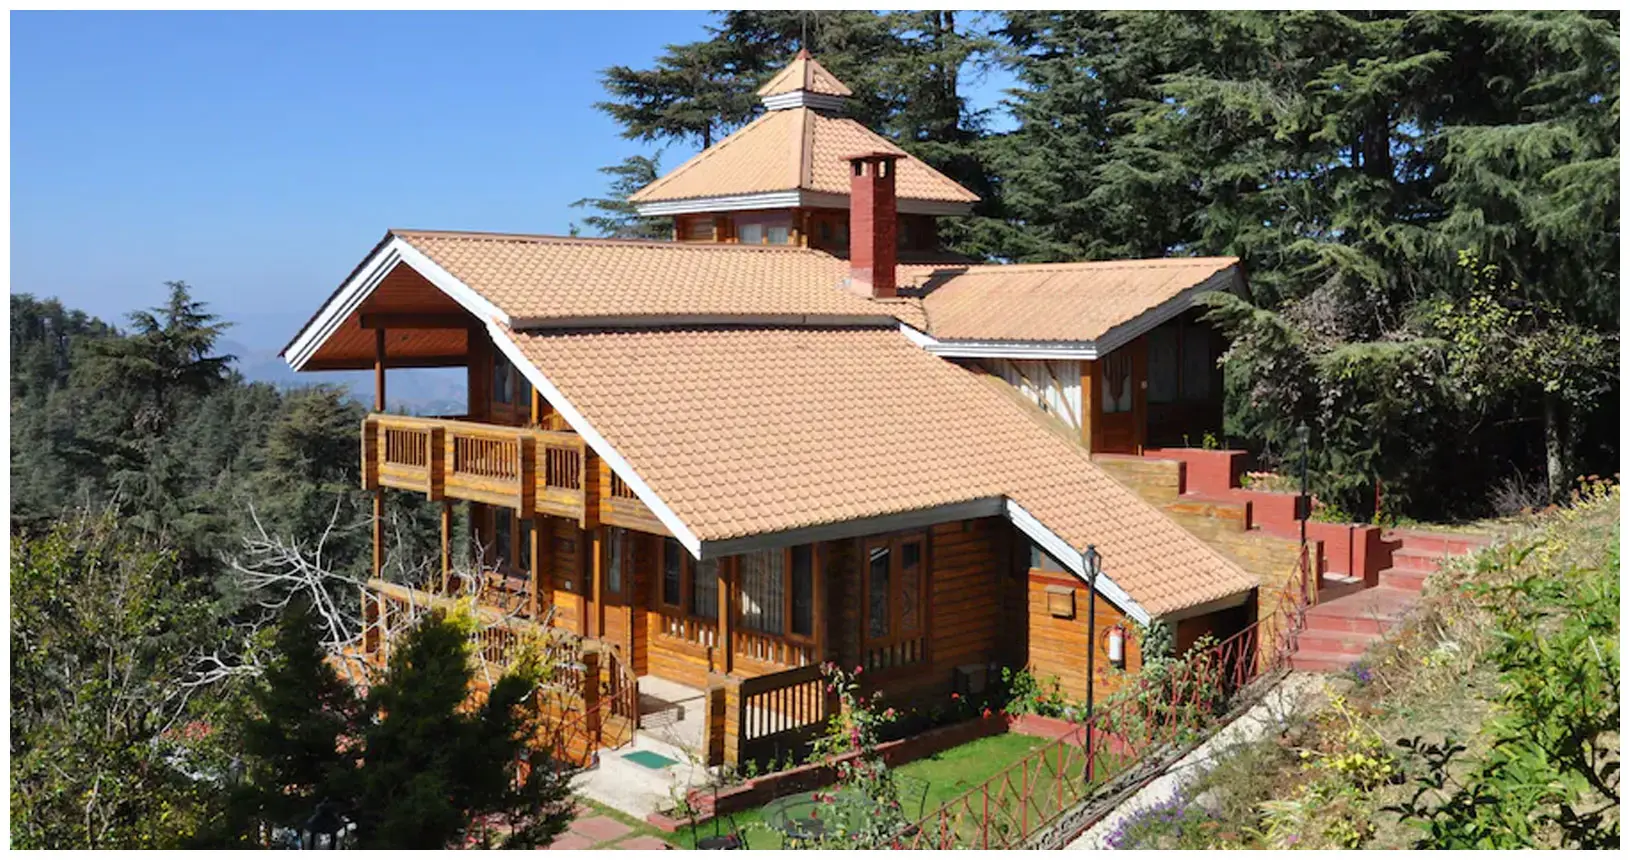 Book your stay in luxurious studio apartments at the Chalets Naldehra, Shimla